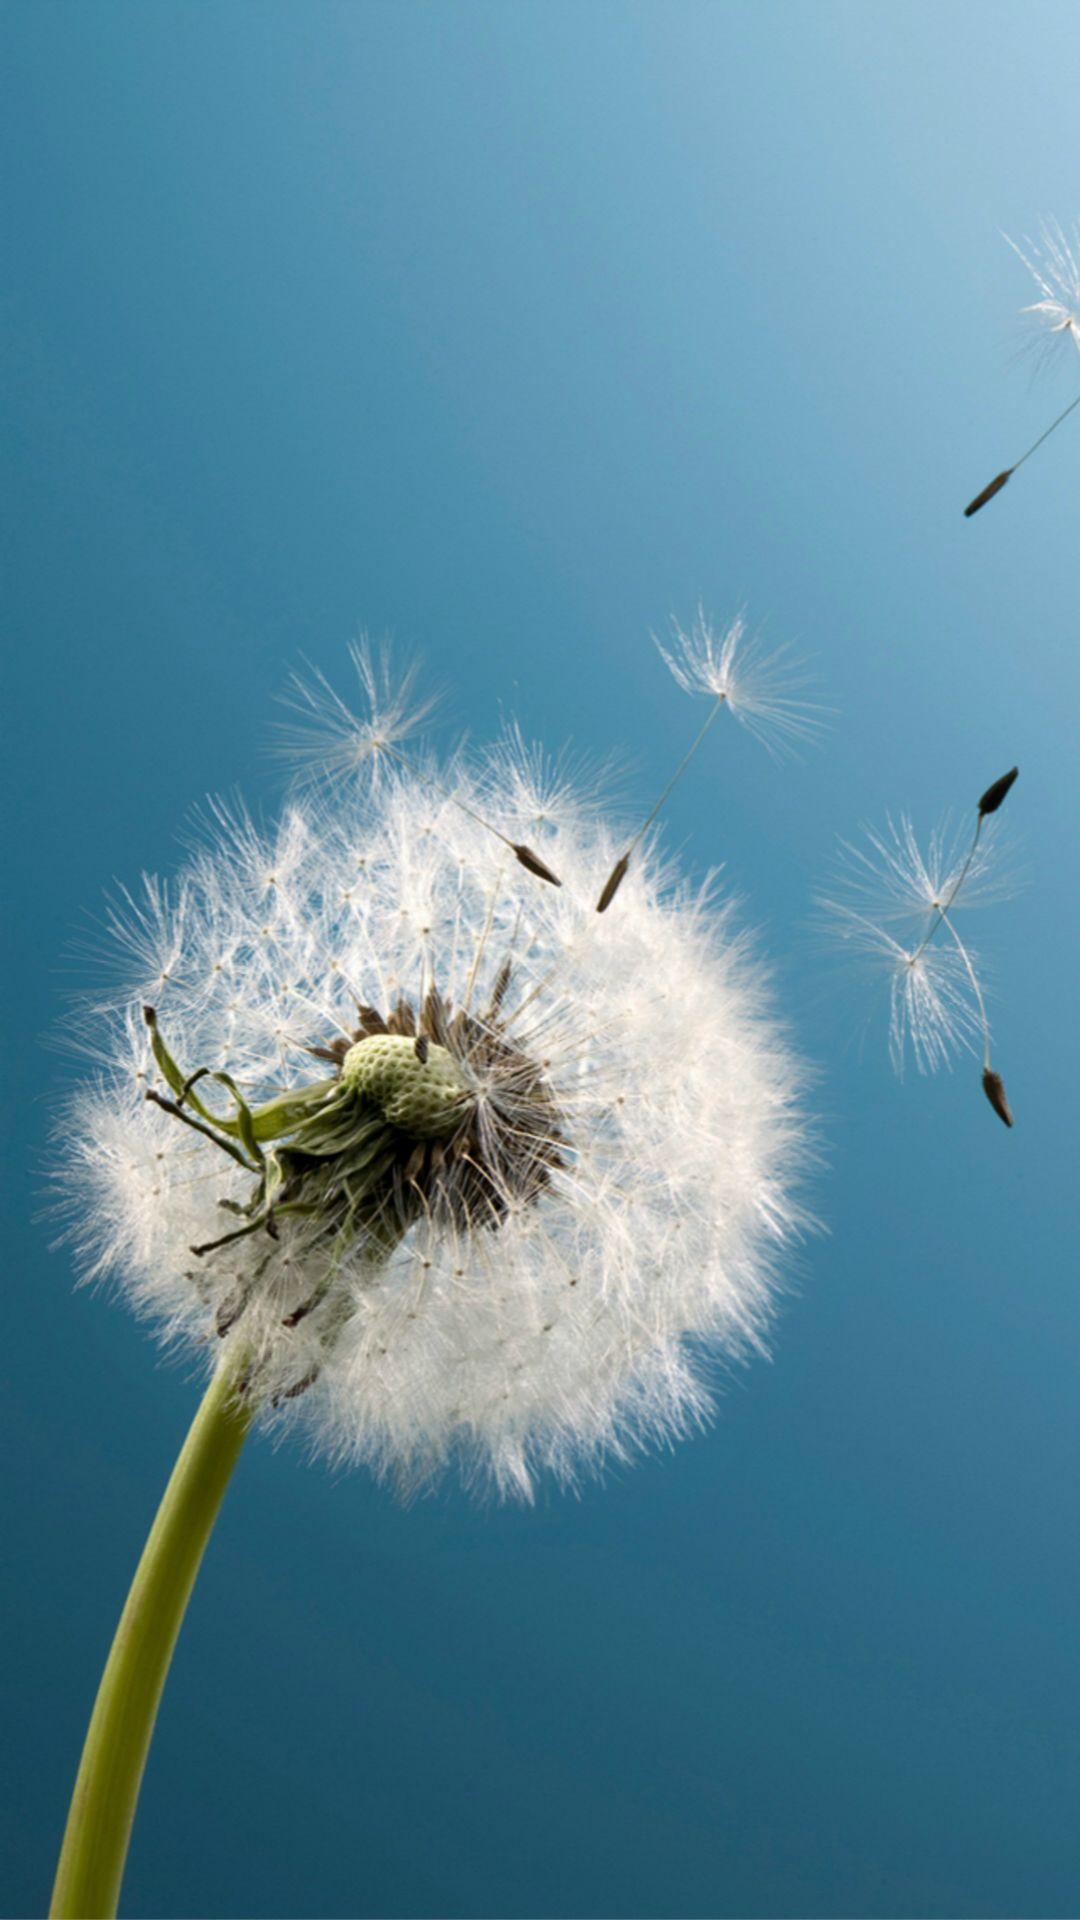 A dandelion with seeds blowing away in the wind - Spring, photography